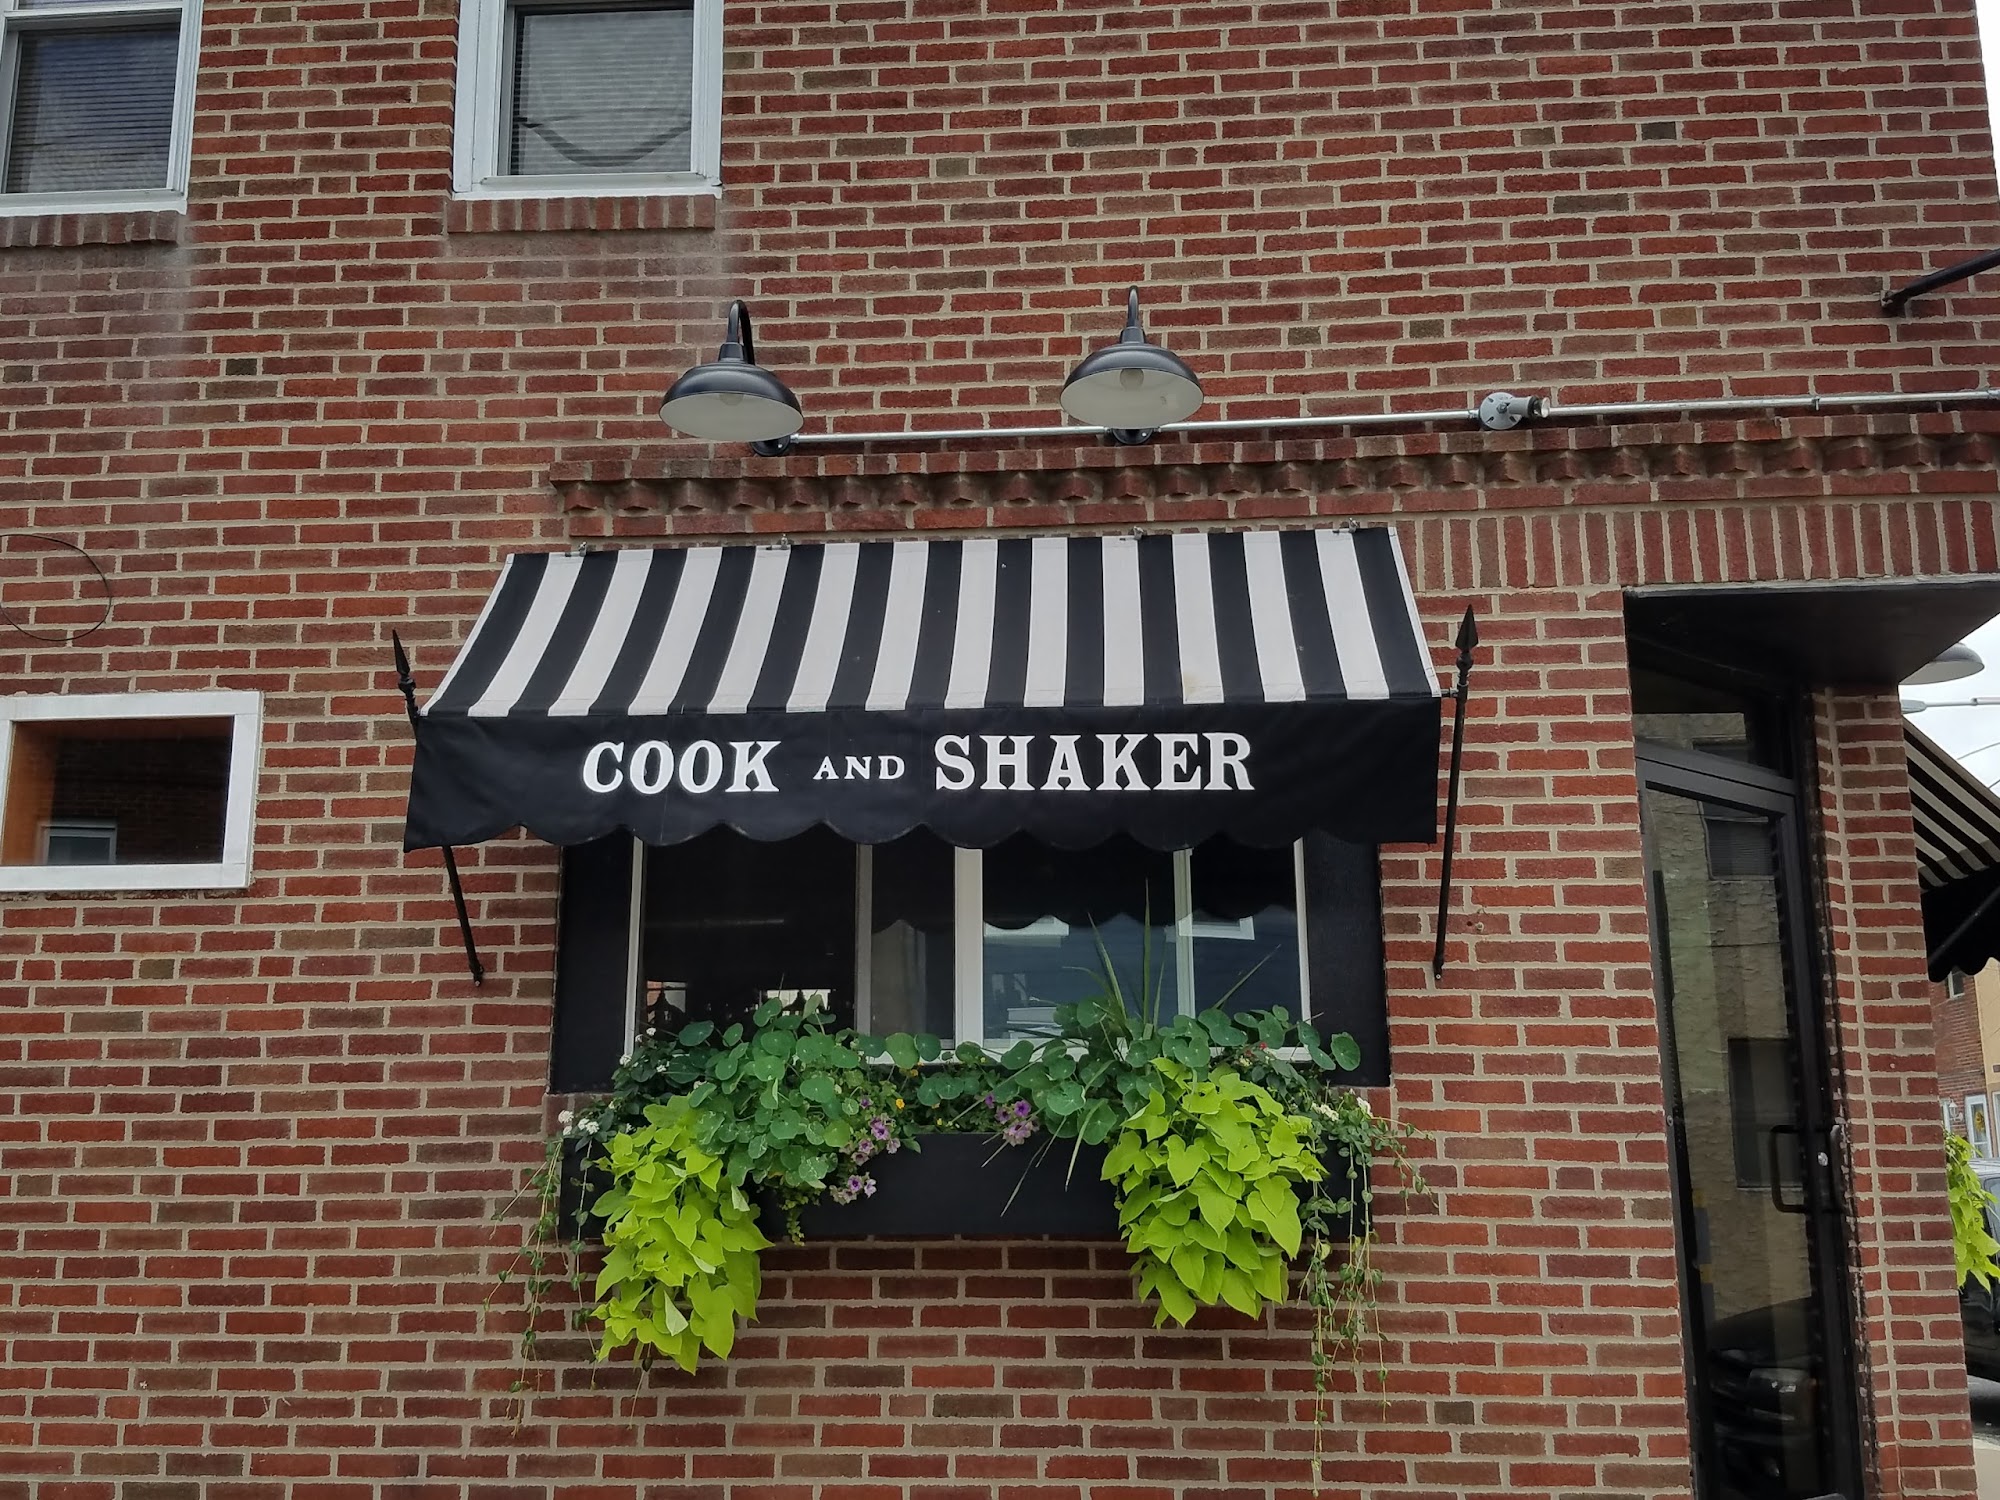 Cook and Shaker